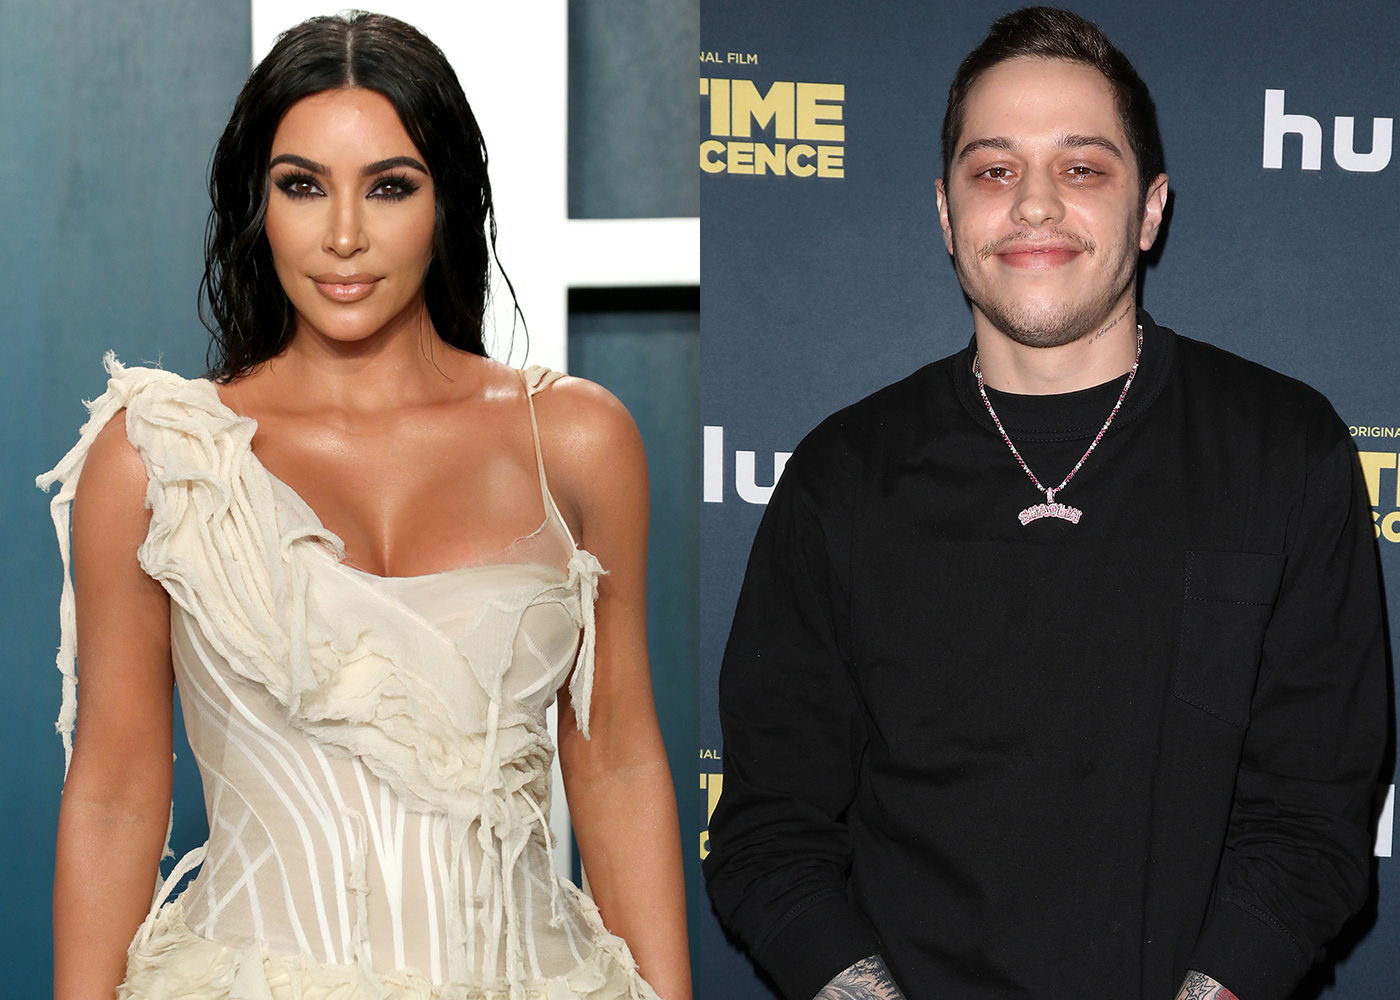 <p>In late October 2021, Kim Kardashian started spending time with Pete Davidson, who's nearly 13 years her junior. Within days of the first sighting of them <a href="https://www.wonderwall.com/celebrity/alec-baldwin-opens-up-about-horrible-rust-set-shooting-more-news-515528.gallery">holding hands at an amusement park</a>, they'd gone on <a href="https://www.wonderwall.com/news/take-two-kim-kardashian-pete-davidson-spotted-at-dinner-again-517224.article">multiple dates</a> -- and the "Saturday Night Live" comedian spent his 28th birthday in November with the reality TV star at her momager <a href="https://www.wonderwall.com/celebrity/profiles/overview/kris-jenner-1409.article">Kris Jenner</a>'s Palm Springs, California, vacation home. </p>